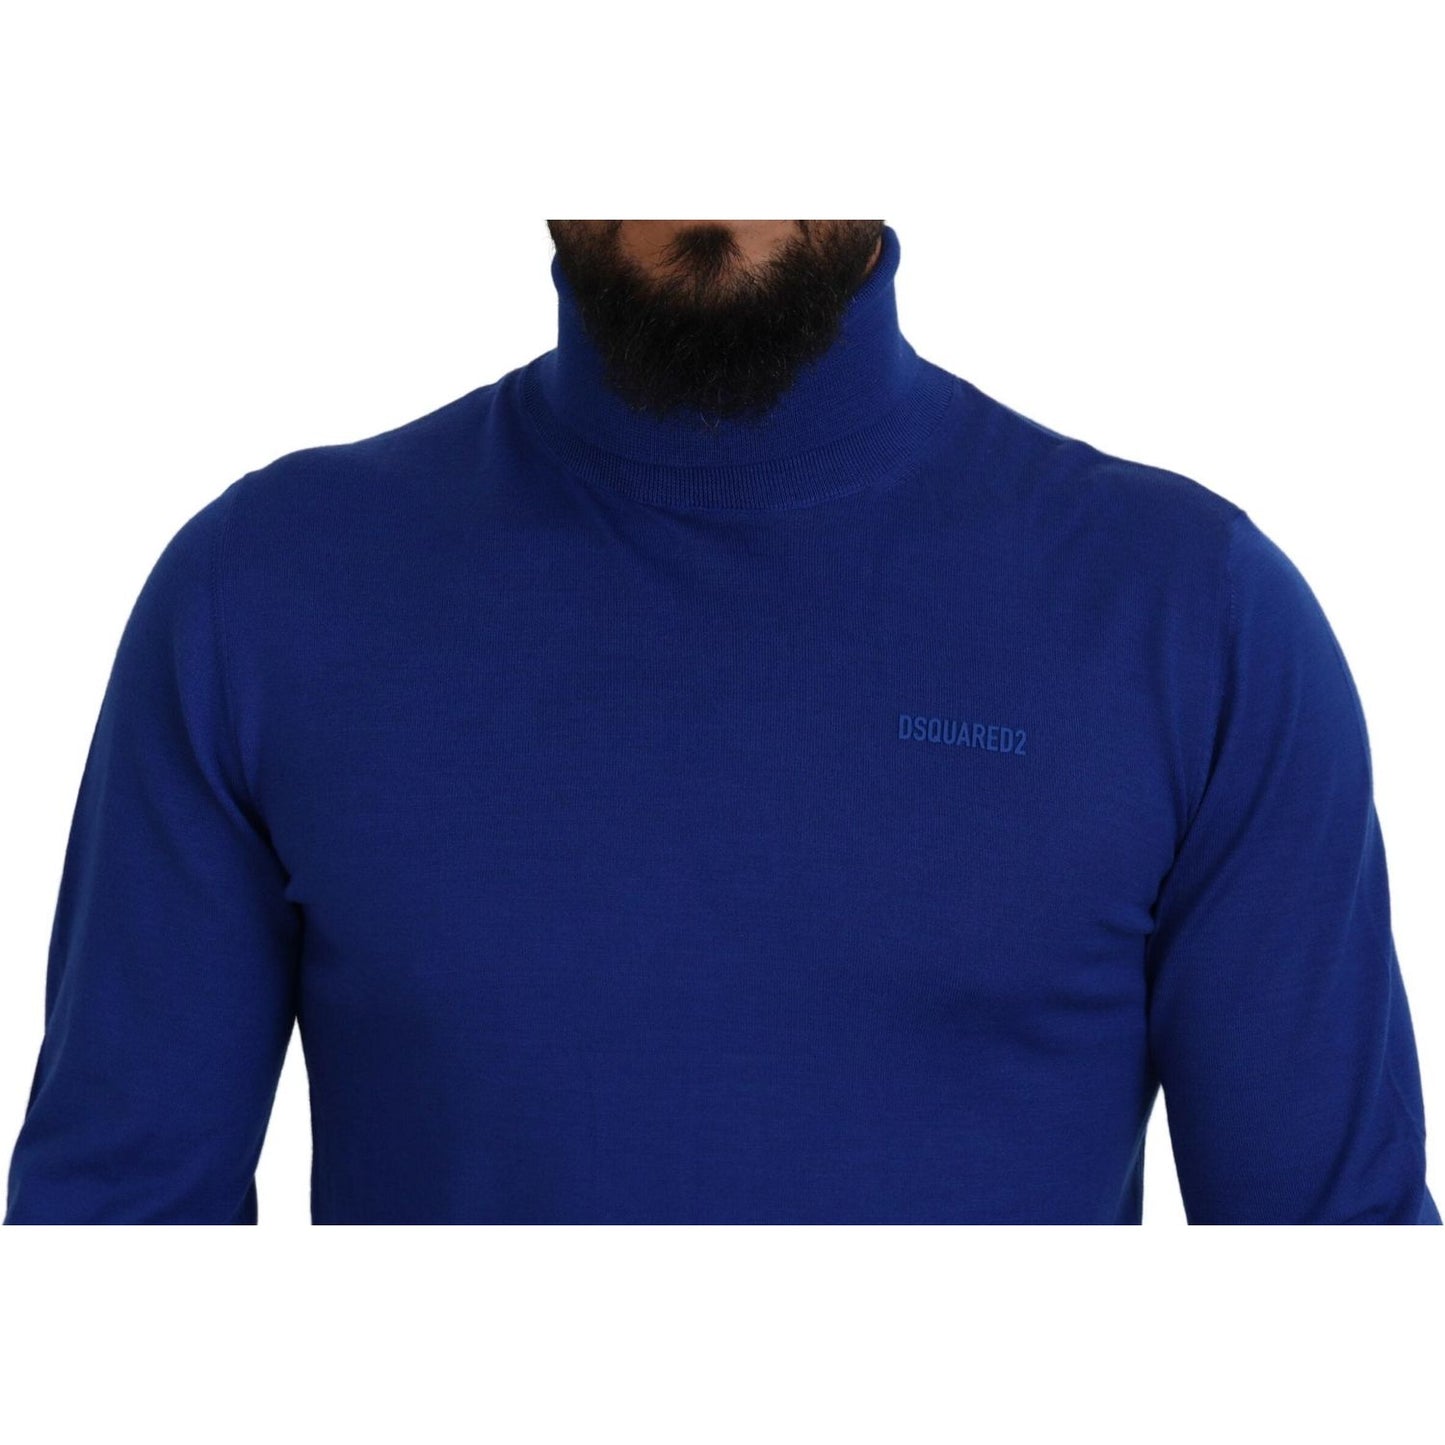 Dsquared² Blue Logo Print Long Sleeves Turtle Neck Sweater blue-logo-print-long-sleeves-turtle-neck-sweater